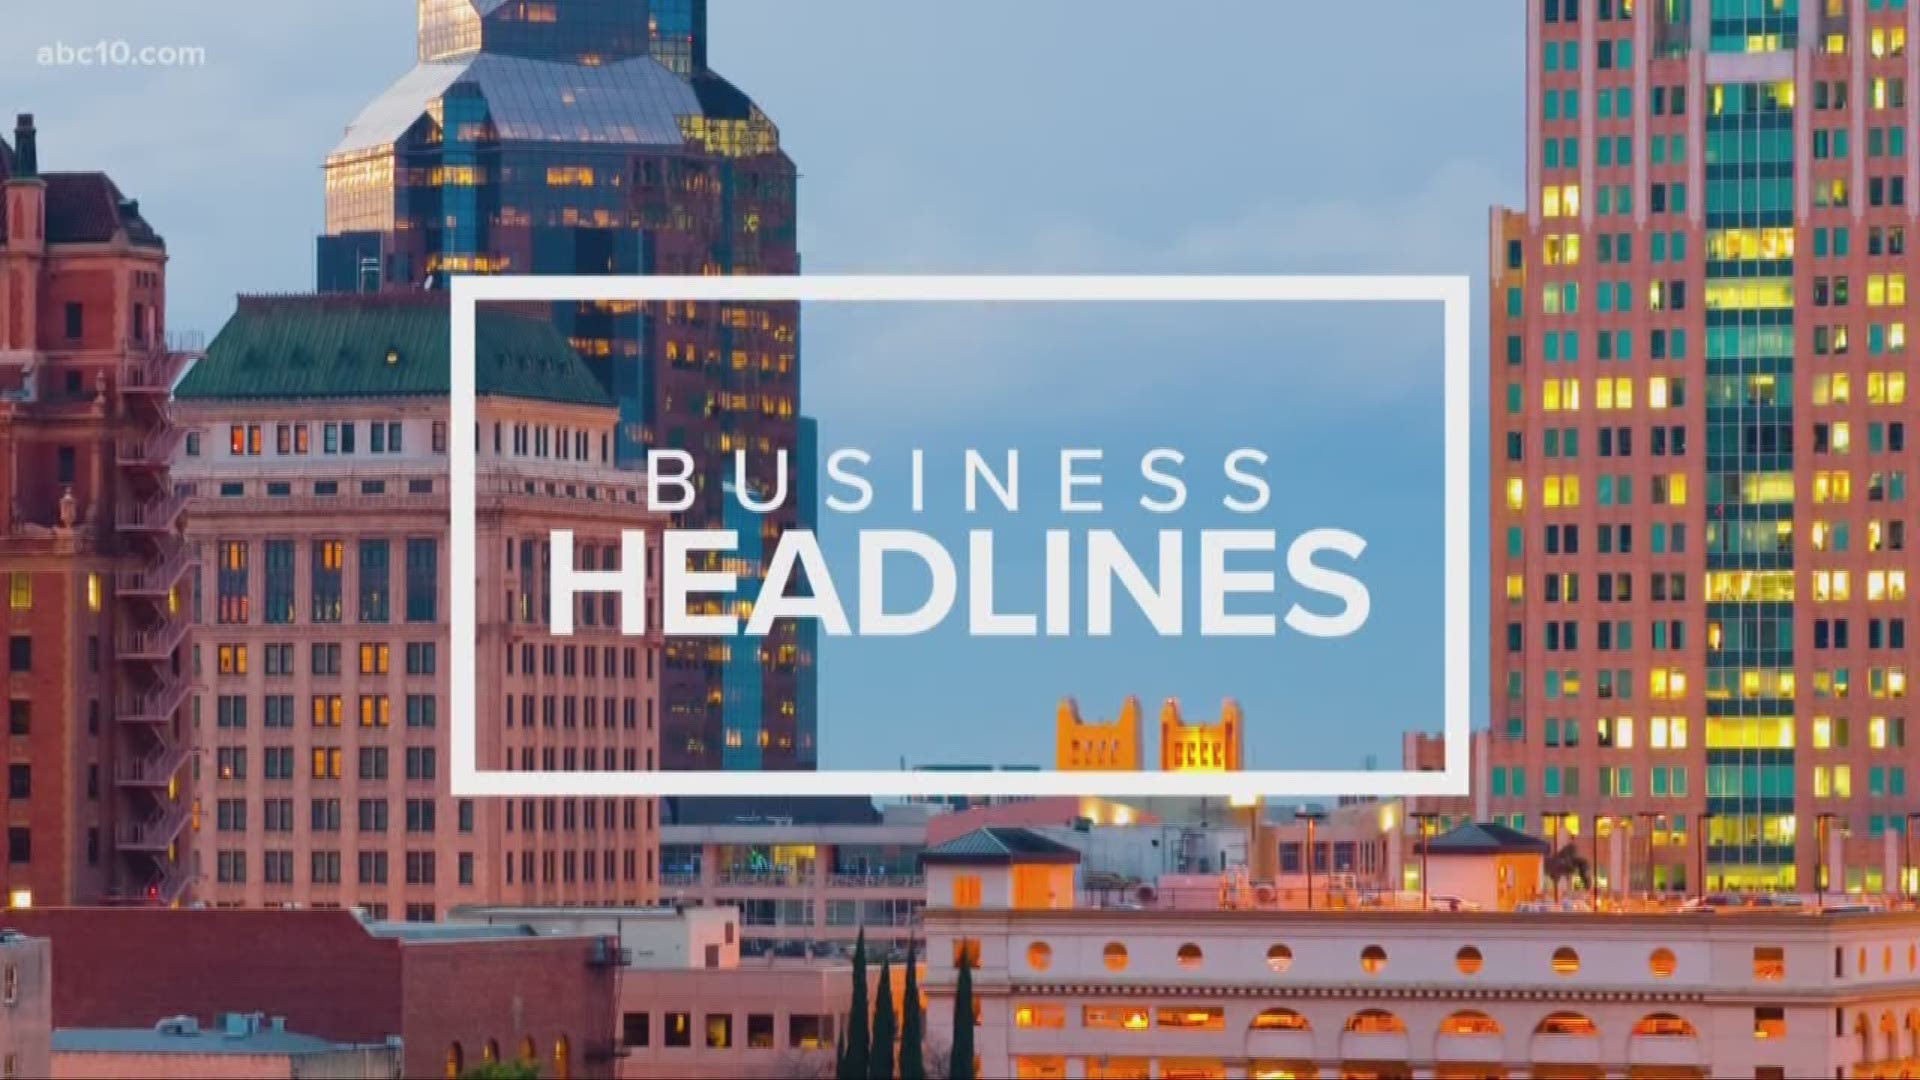 Ariane Datil has your business headlines.